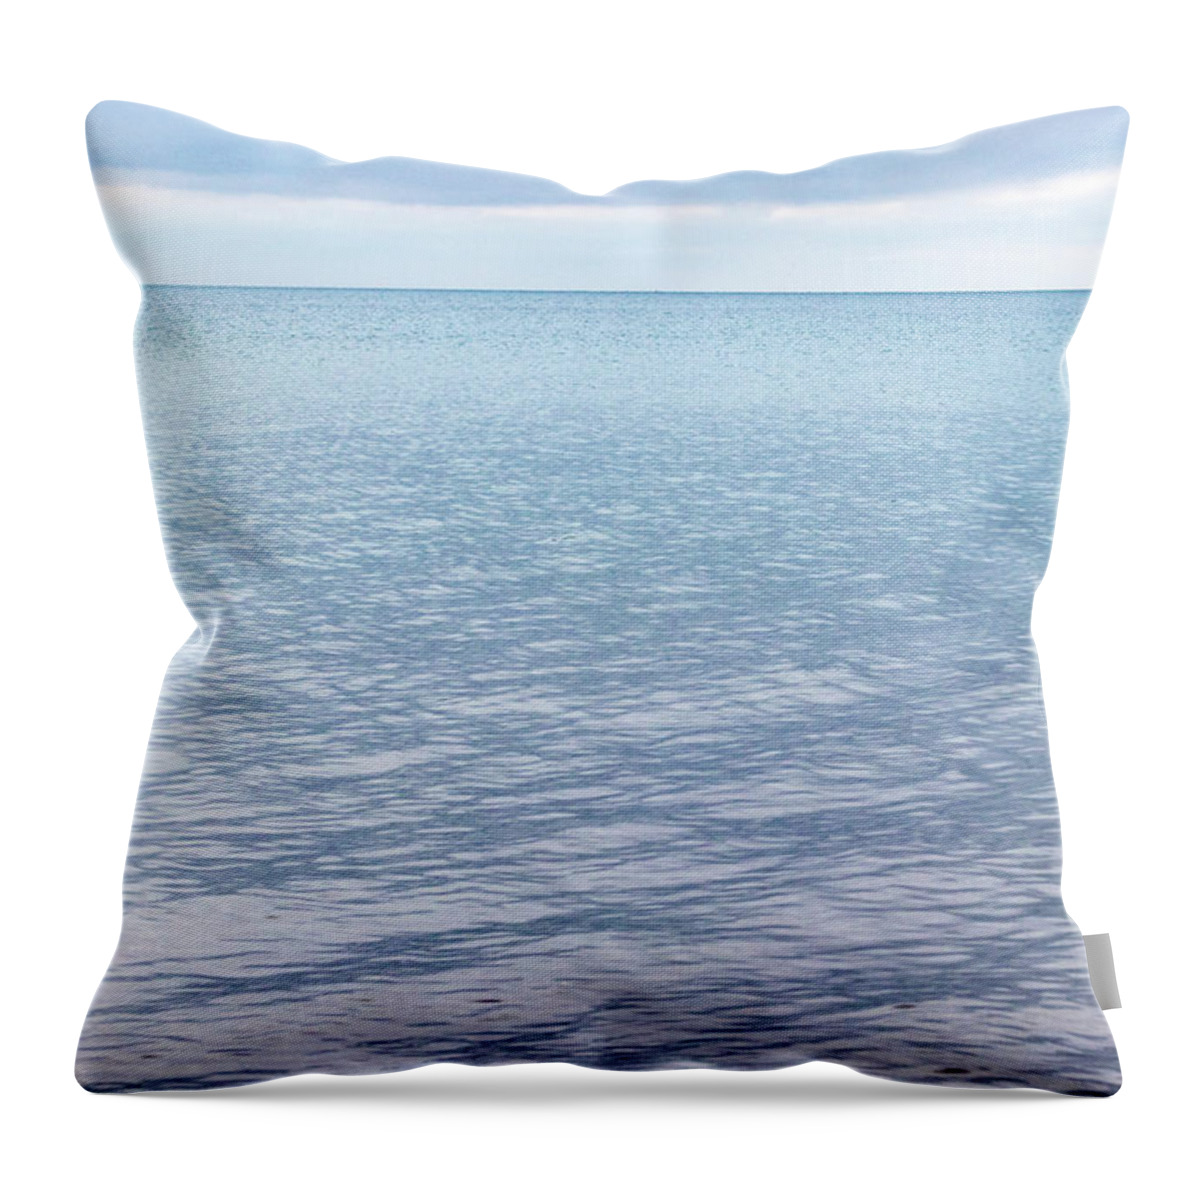 Calm Throw Pillow featuring the photograph Calm by Patty Colabuono